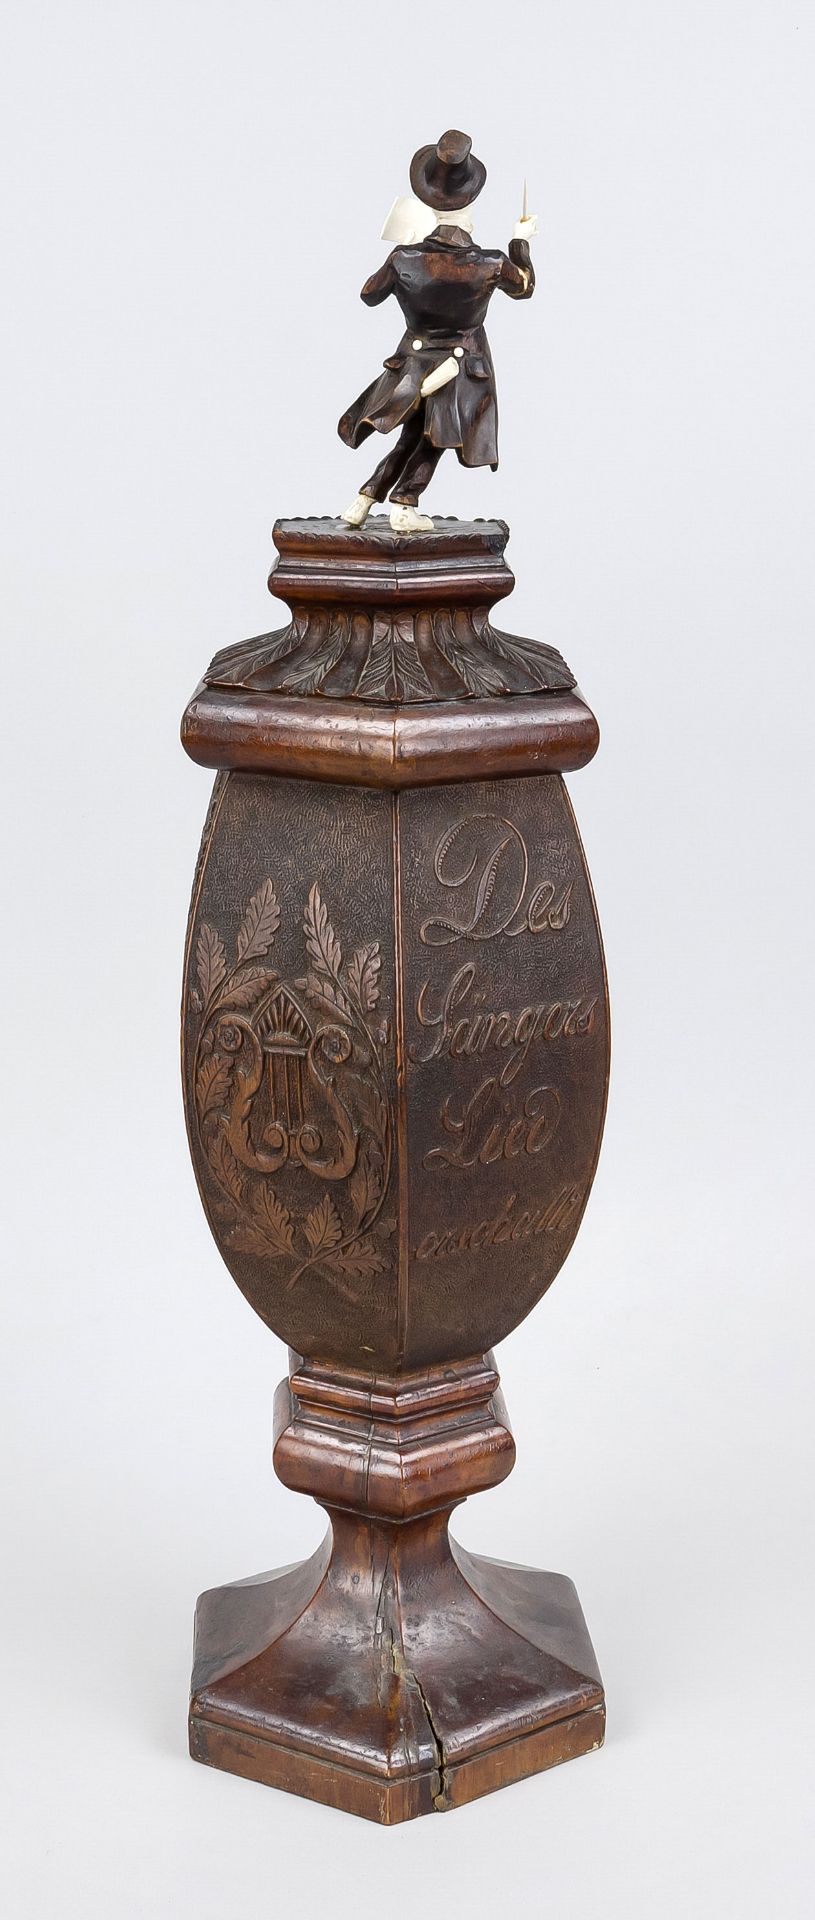 Large lidded goblet with the figure of a conductor, 2nd half 19th century, turned and carved wood - Image 2 of 2